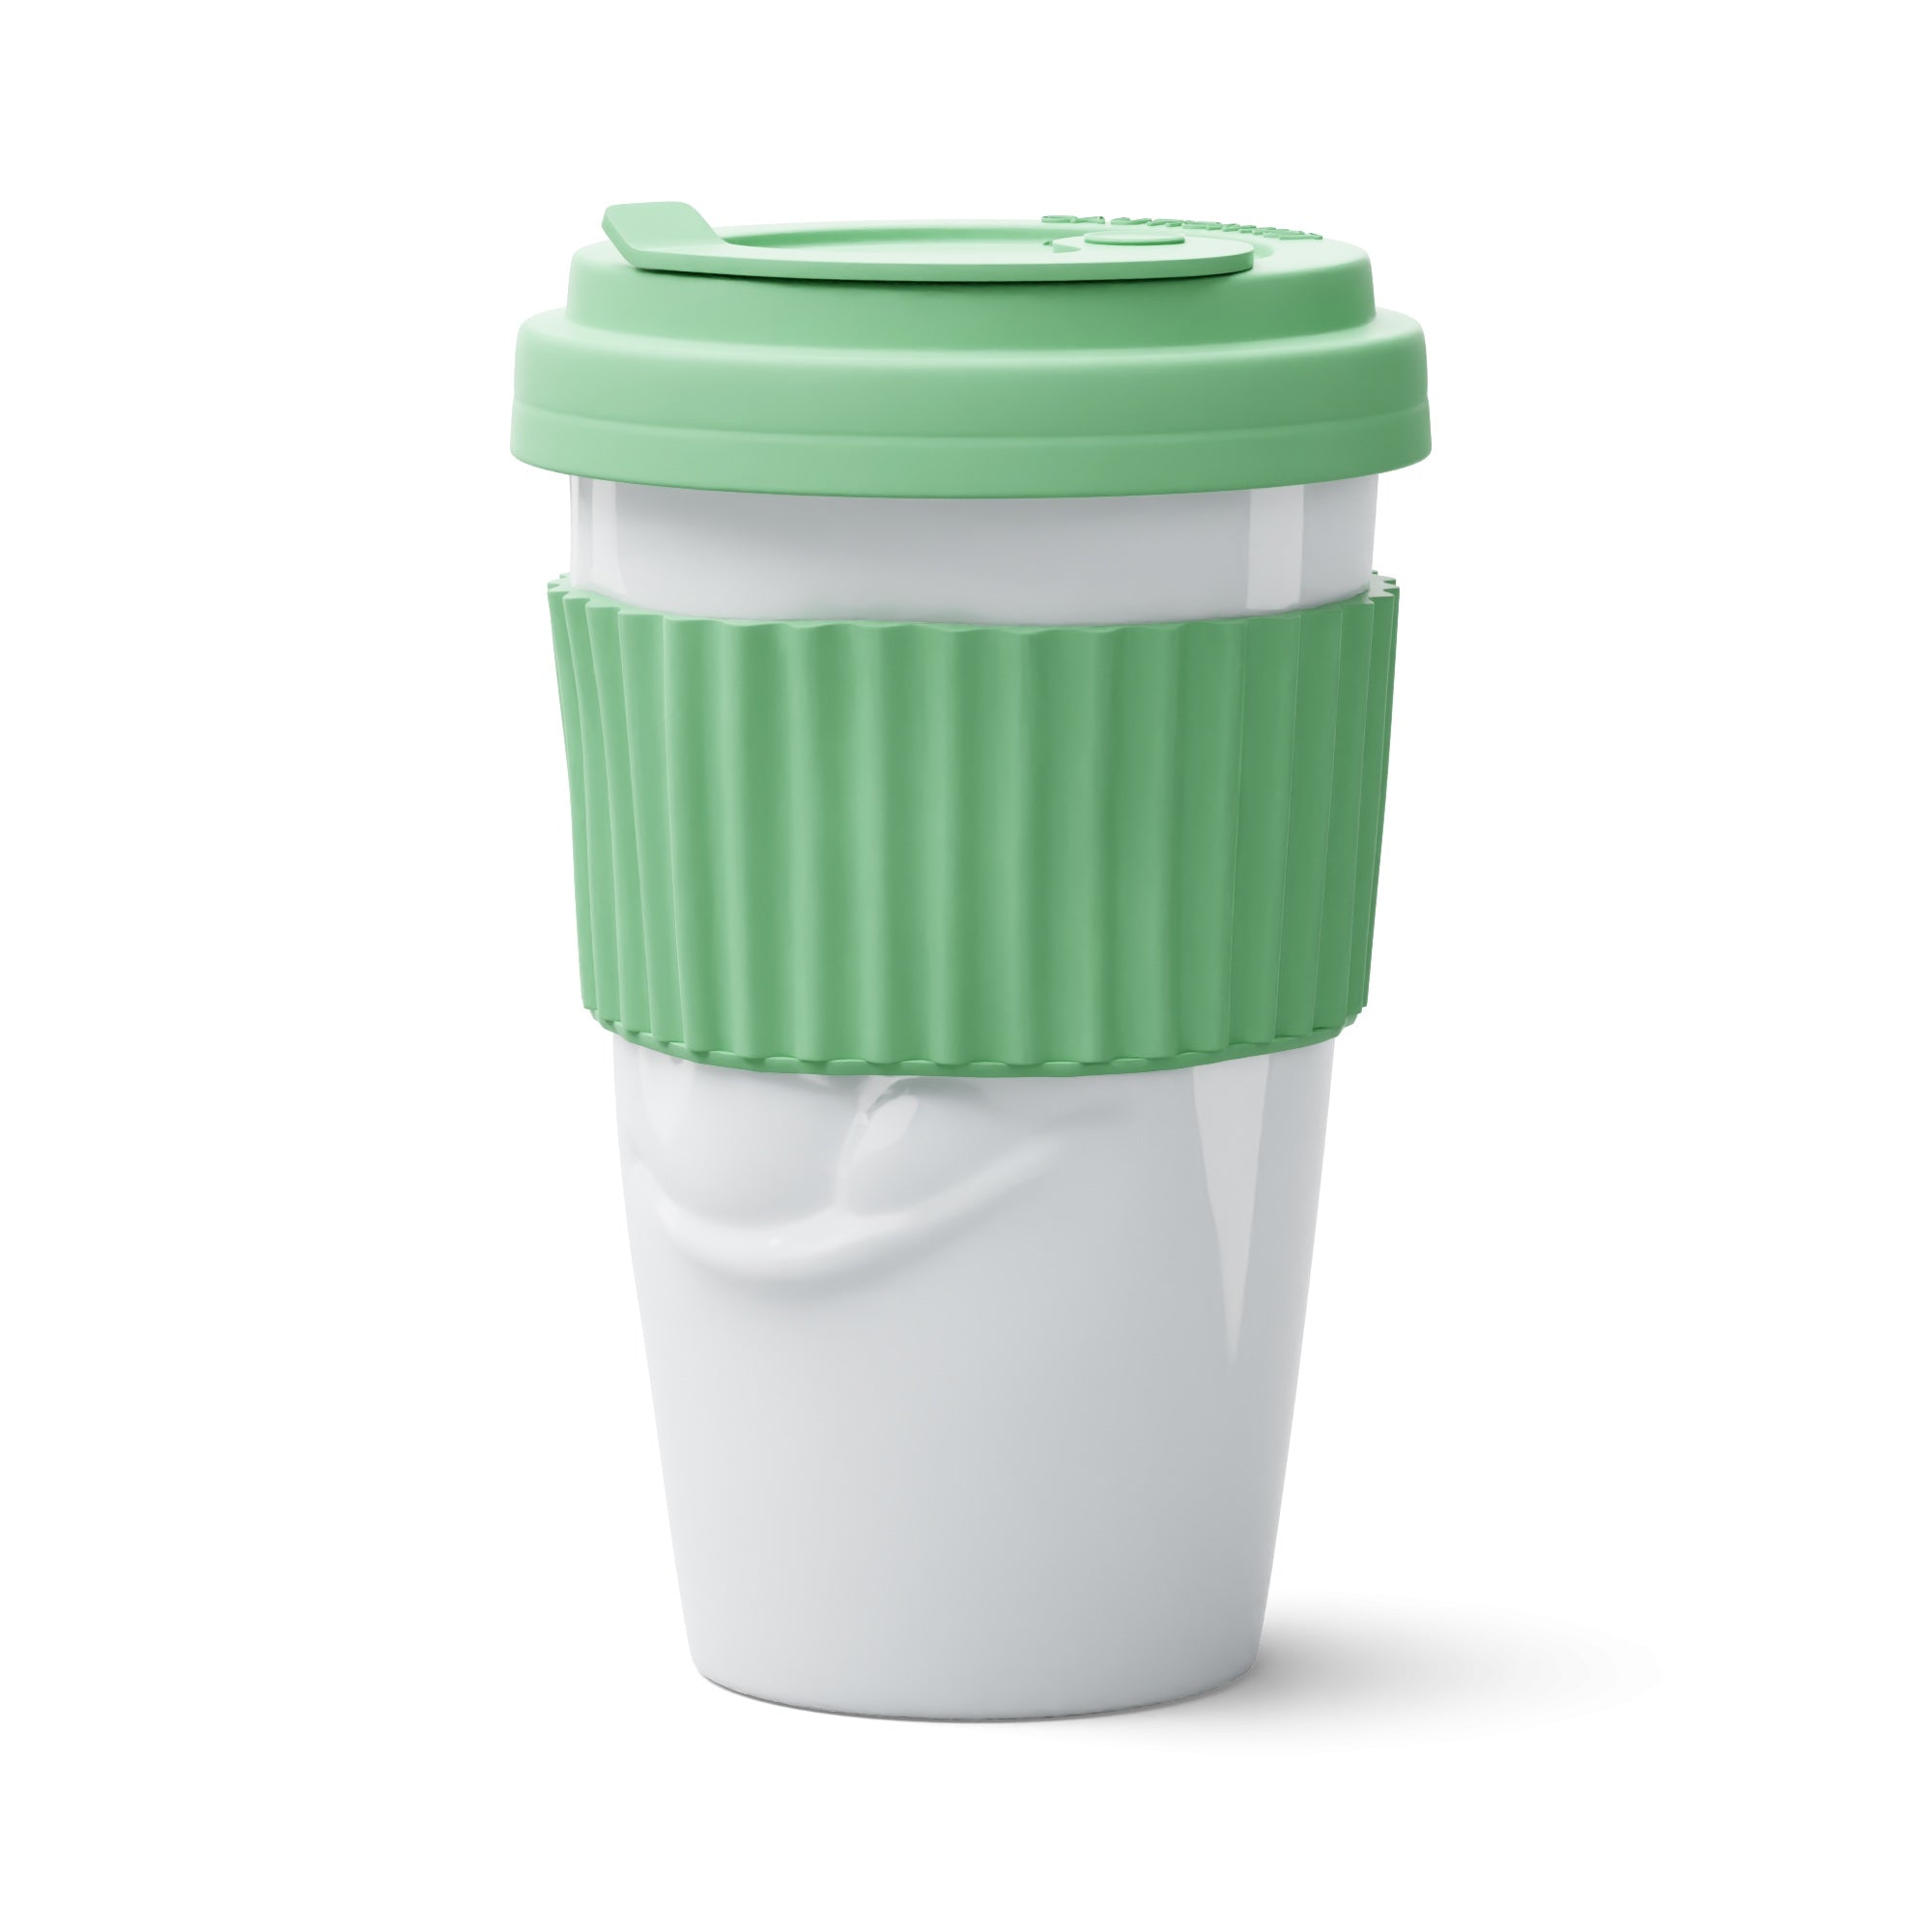 Taketogo Take It to Go with Lids Reusable Plastic Travel Cups Mugs, Hot Cold Drinks, 8-ct Set (To Go 2)